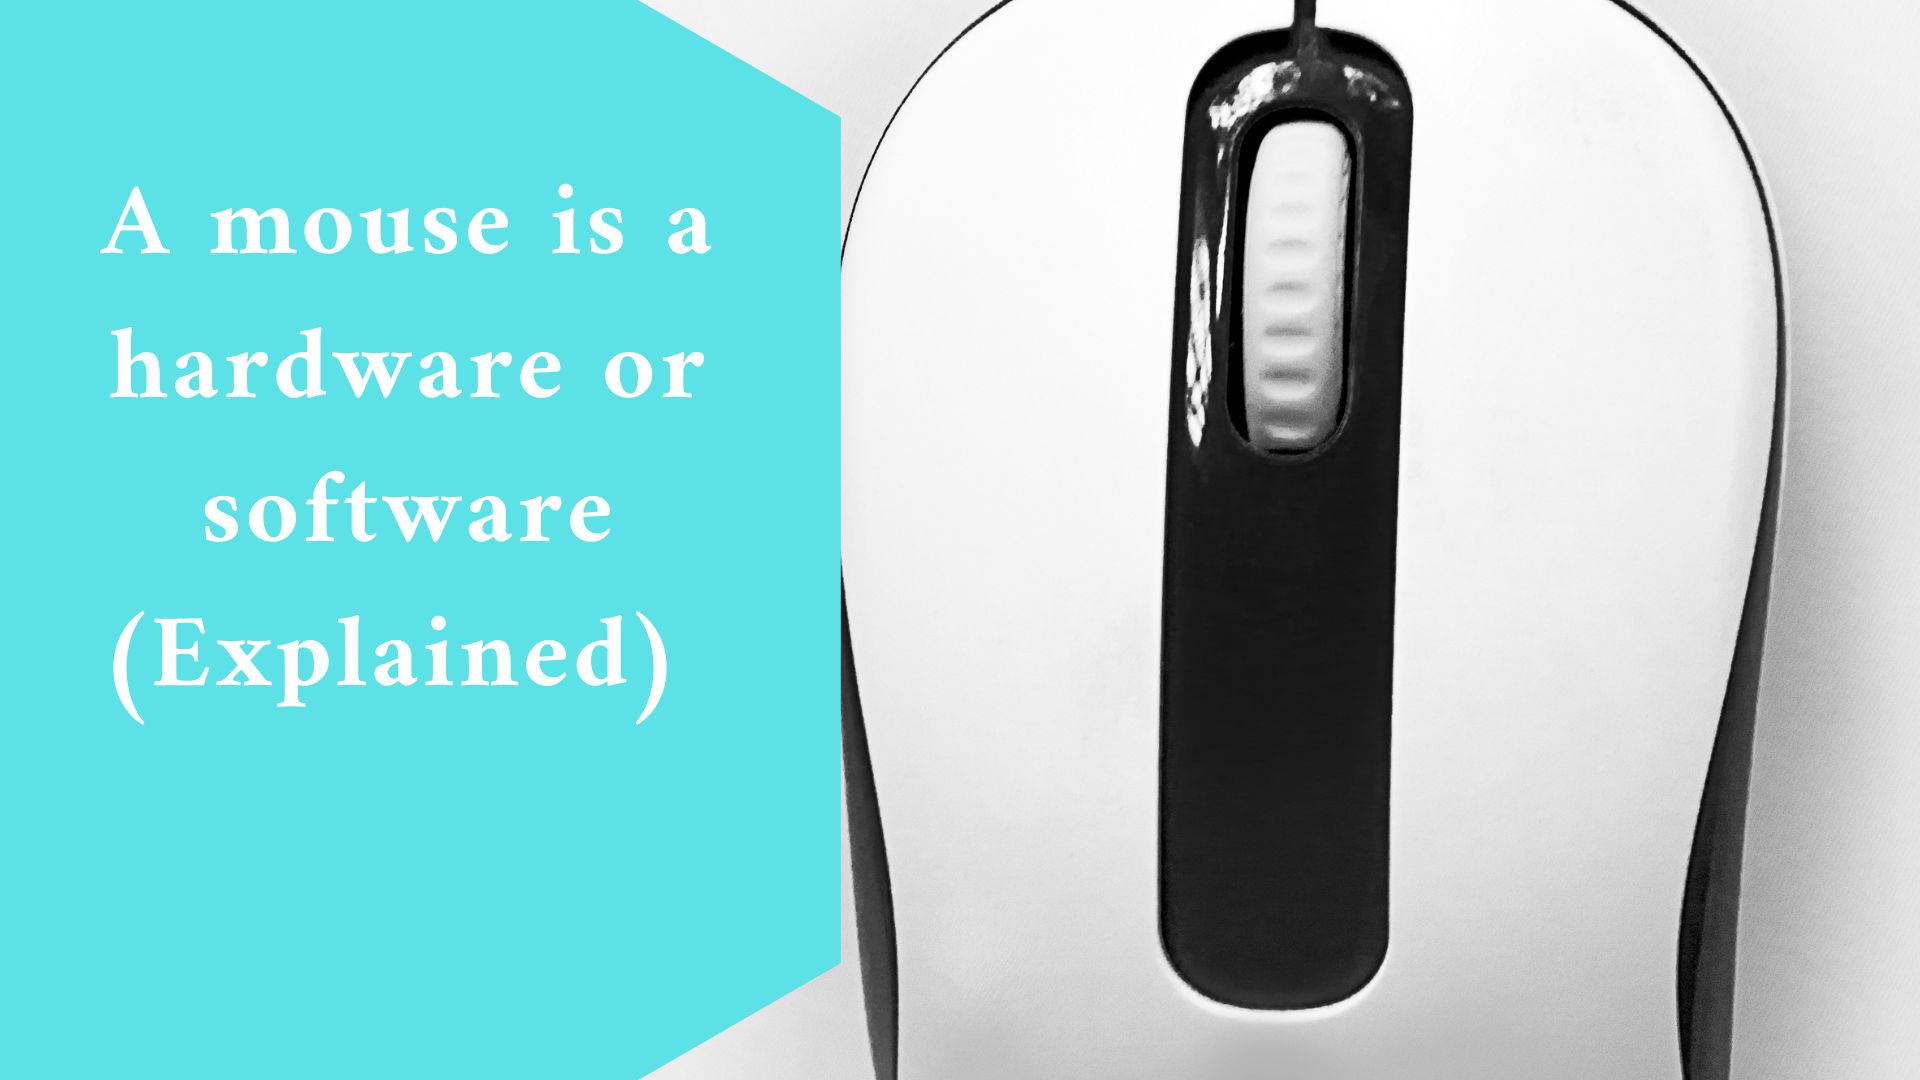 A mouse is a hardware or software (Explained)